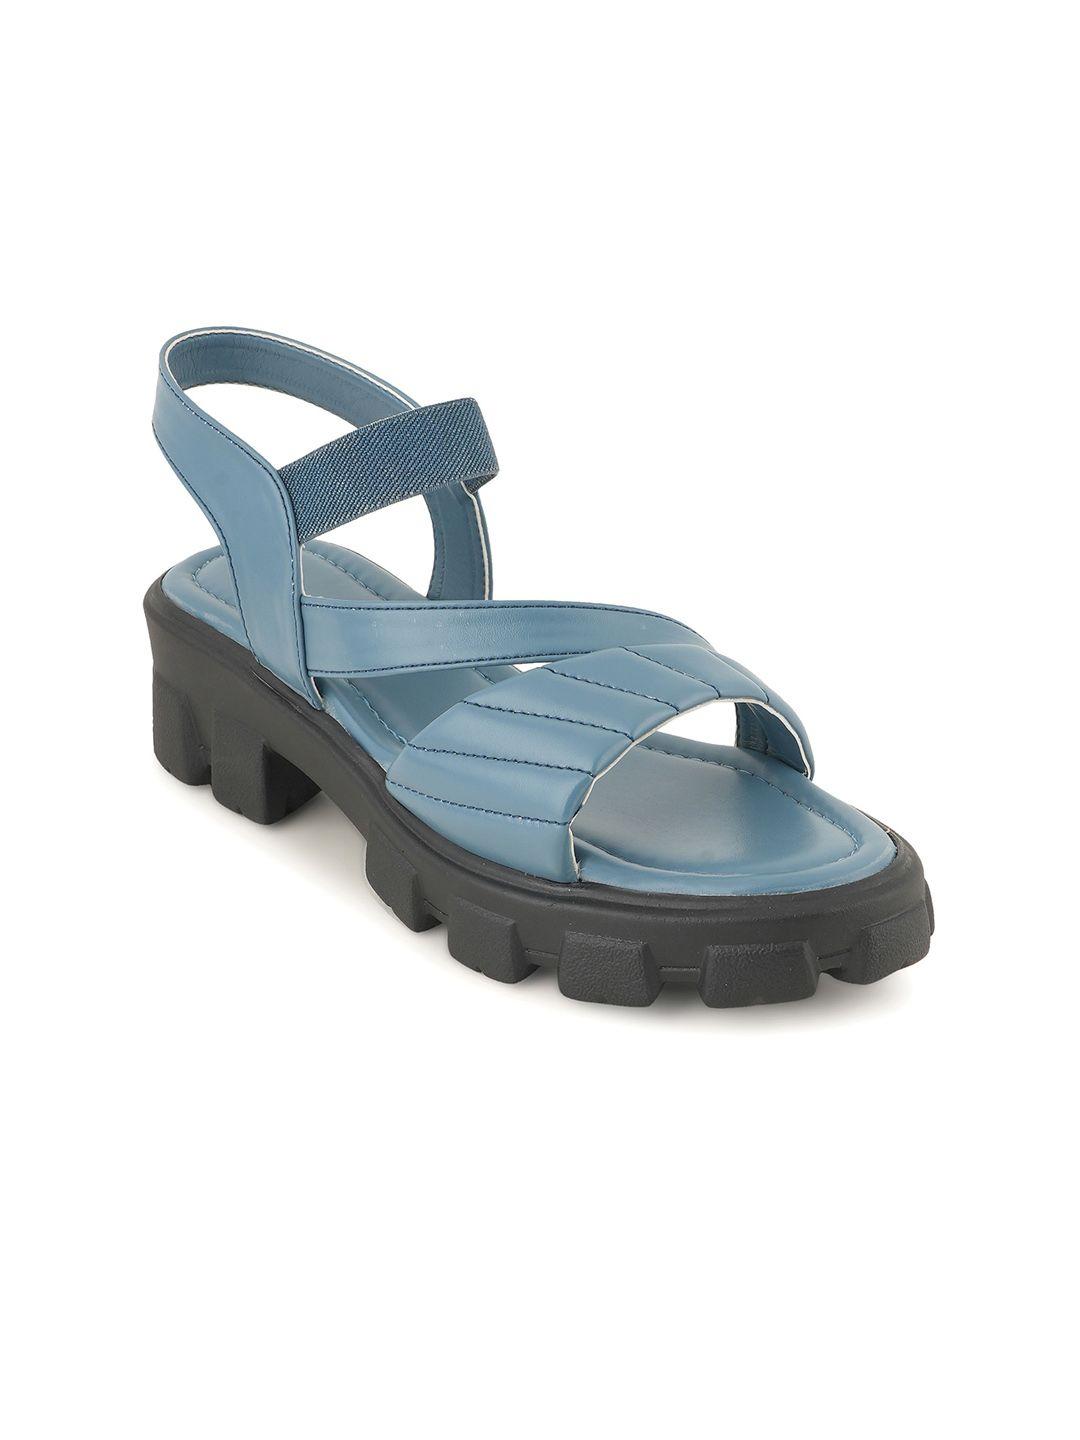 the roadster lifestyle co. teal blue textured platform heels with backstrap